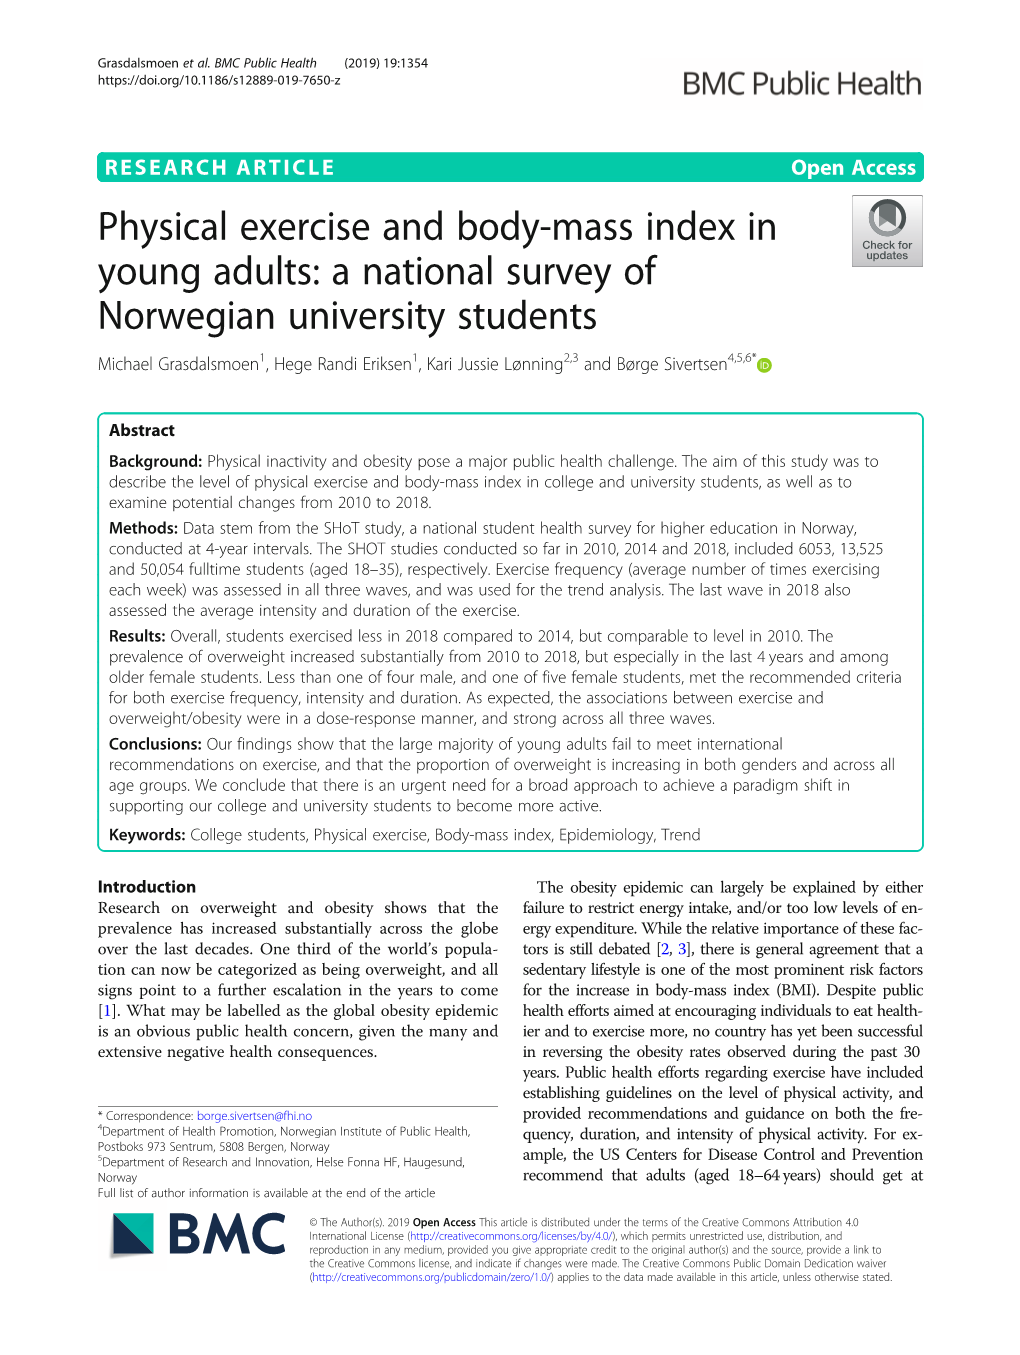 Physical Exercise and Body-Mass Index in Young